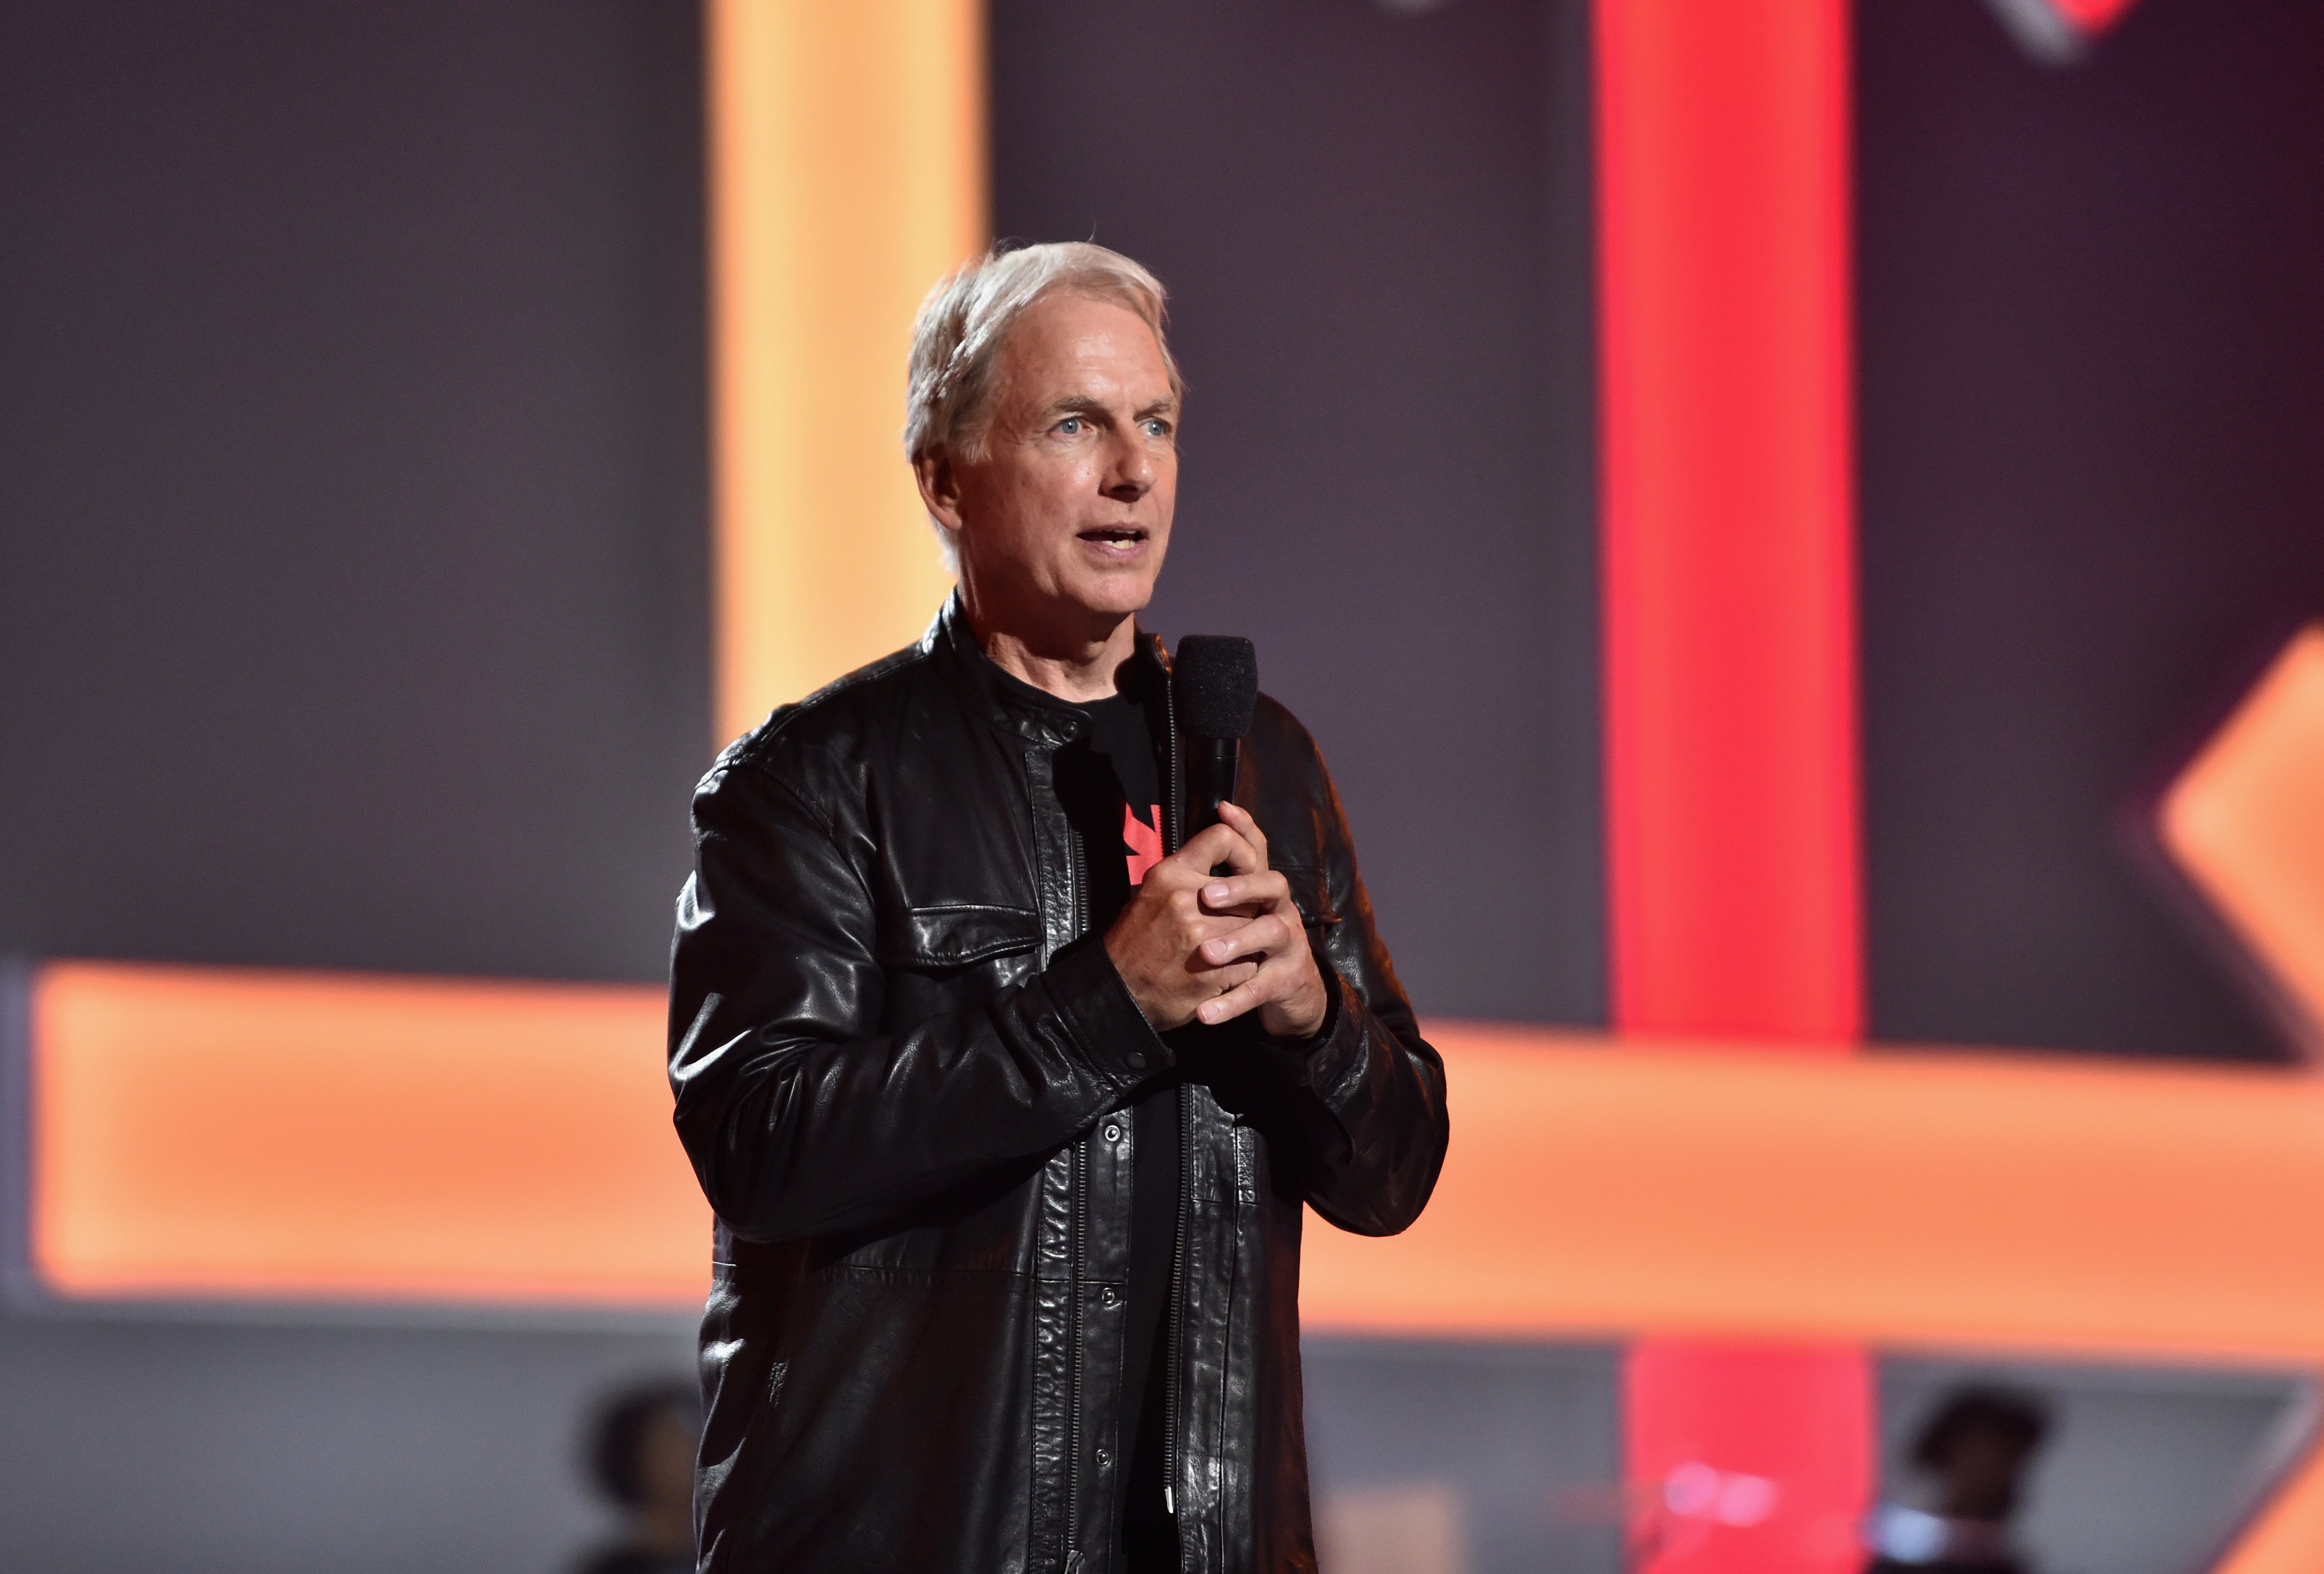 Mark Harmon speaks onstage at the sixth biennial Stand Up To Cancer (SU2C) telecast at the Barkar Hangar on Friday, September 7, 2018. | Source: Getty Images